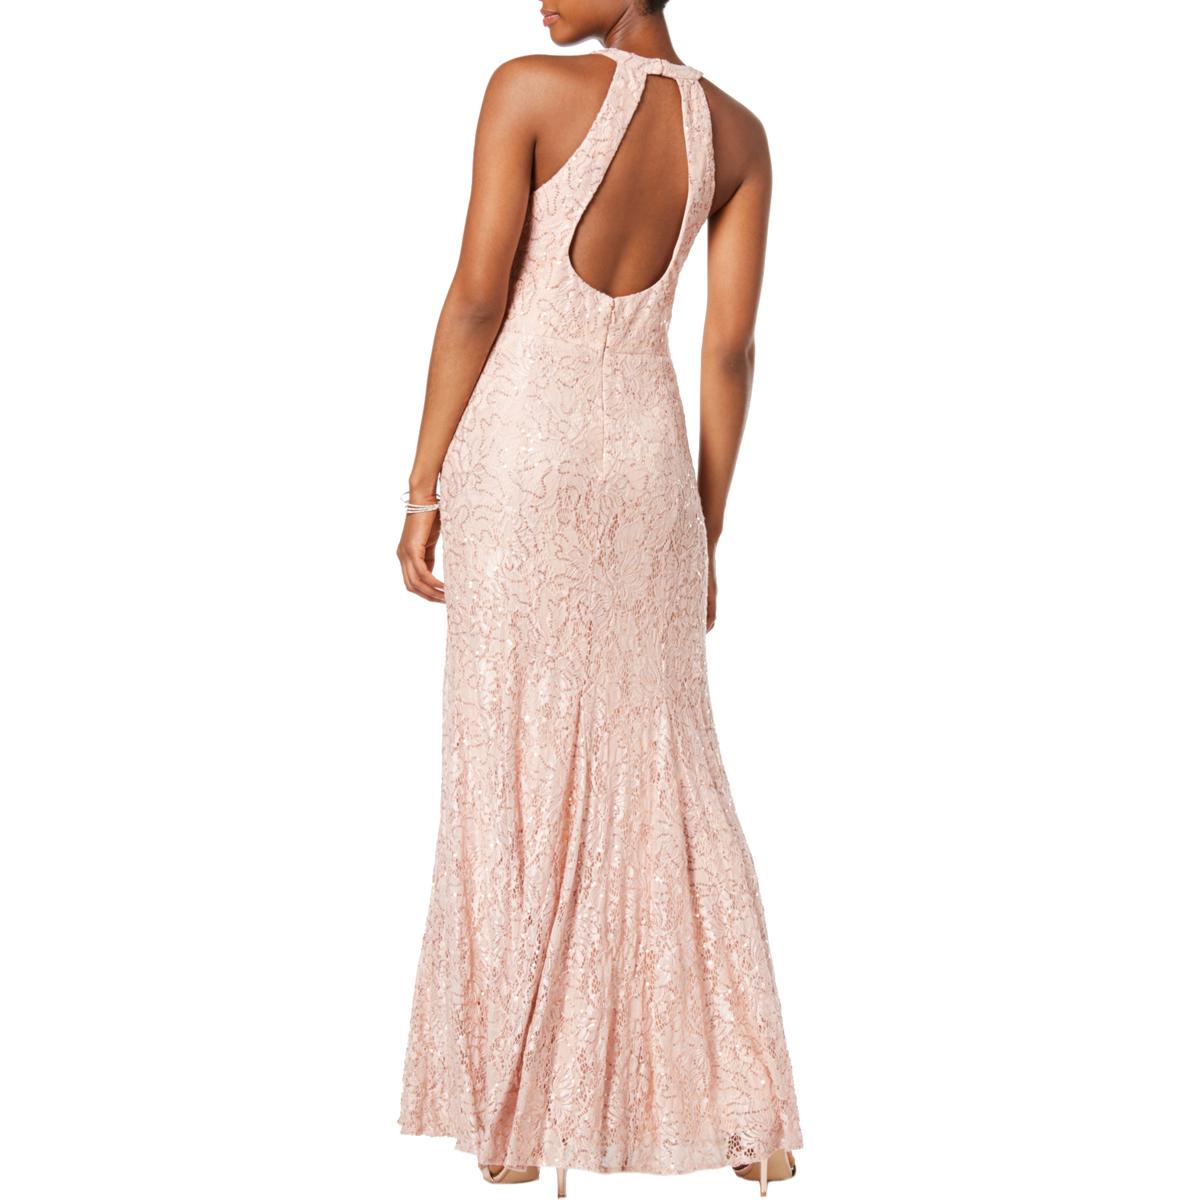 NW Nightway Womens Pink Lace Sequined Prom Evening Dress Gown 12 BHFO